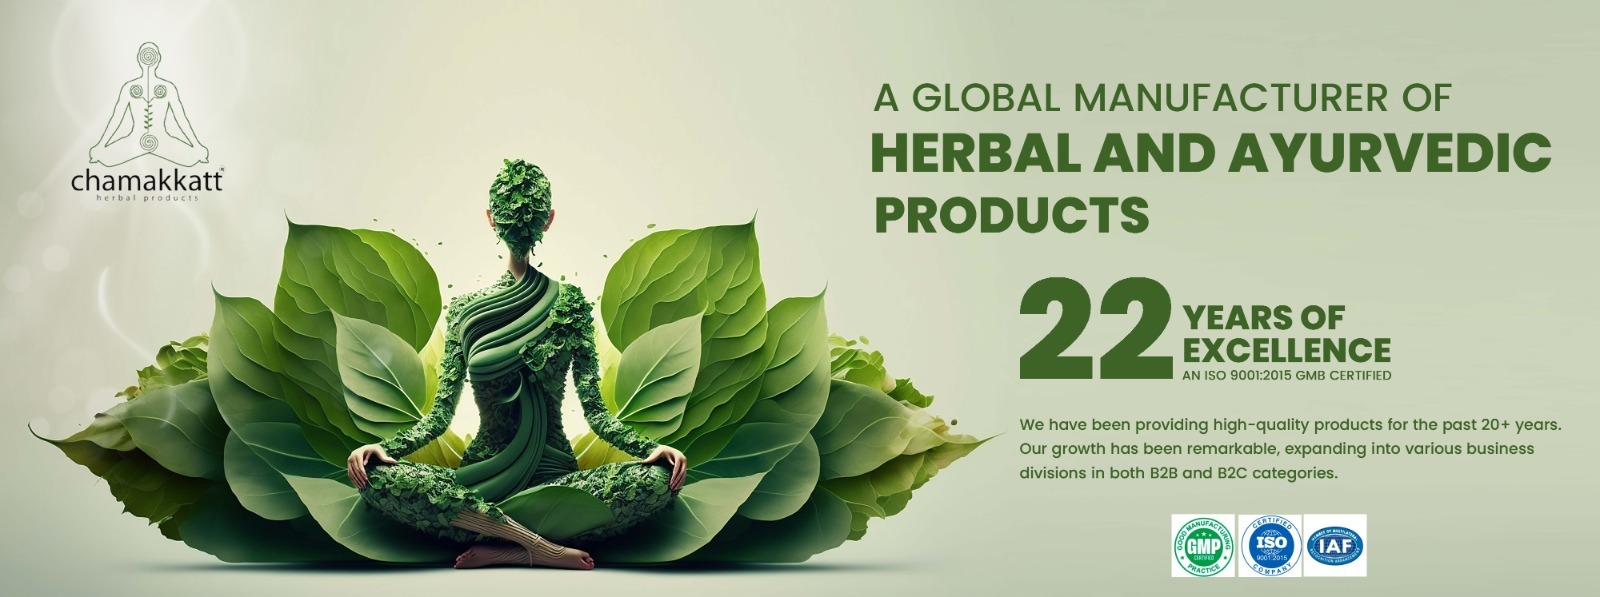 herbal-products